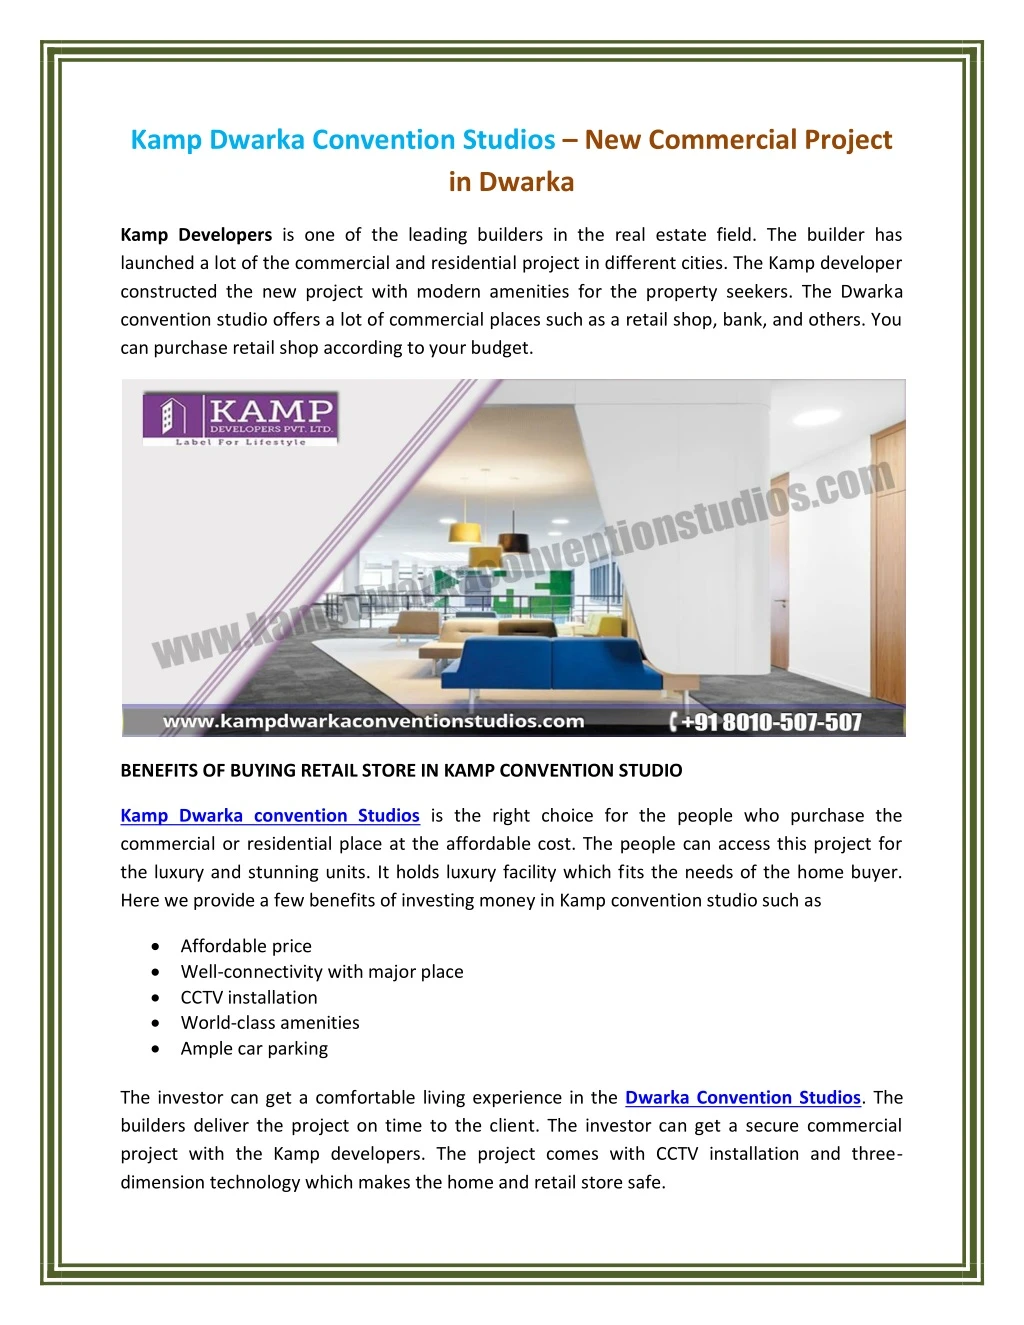 kamp dwarka convention studios new commercial